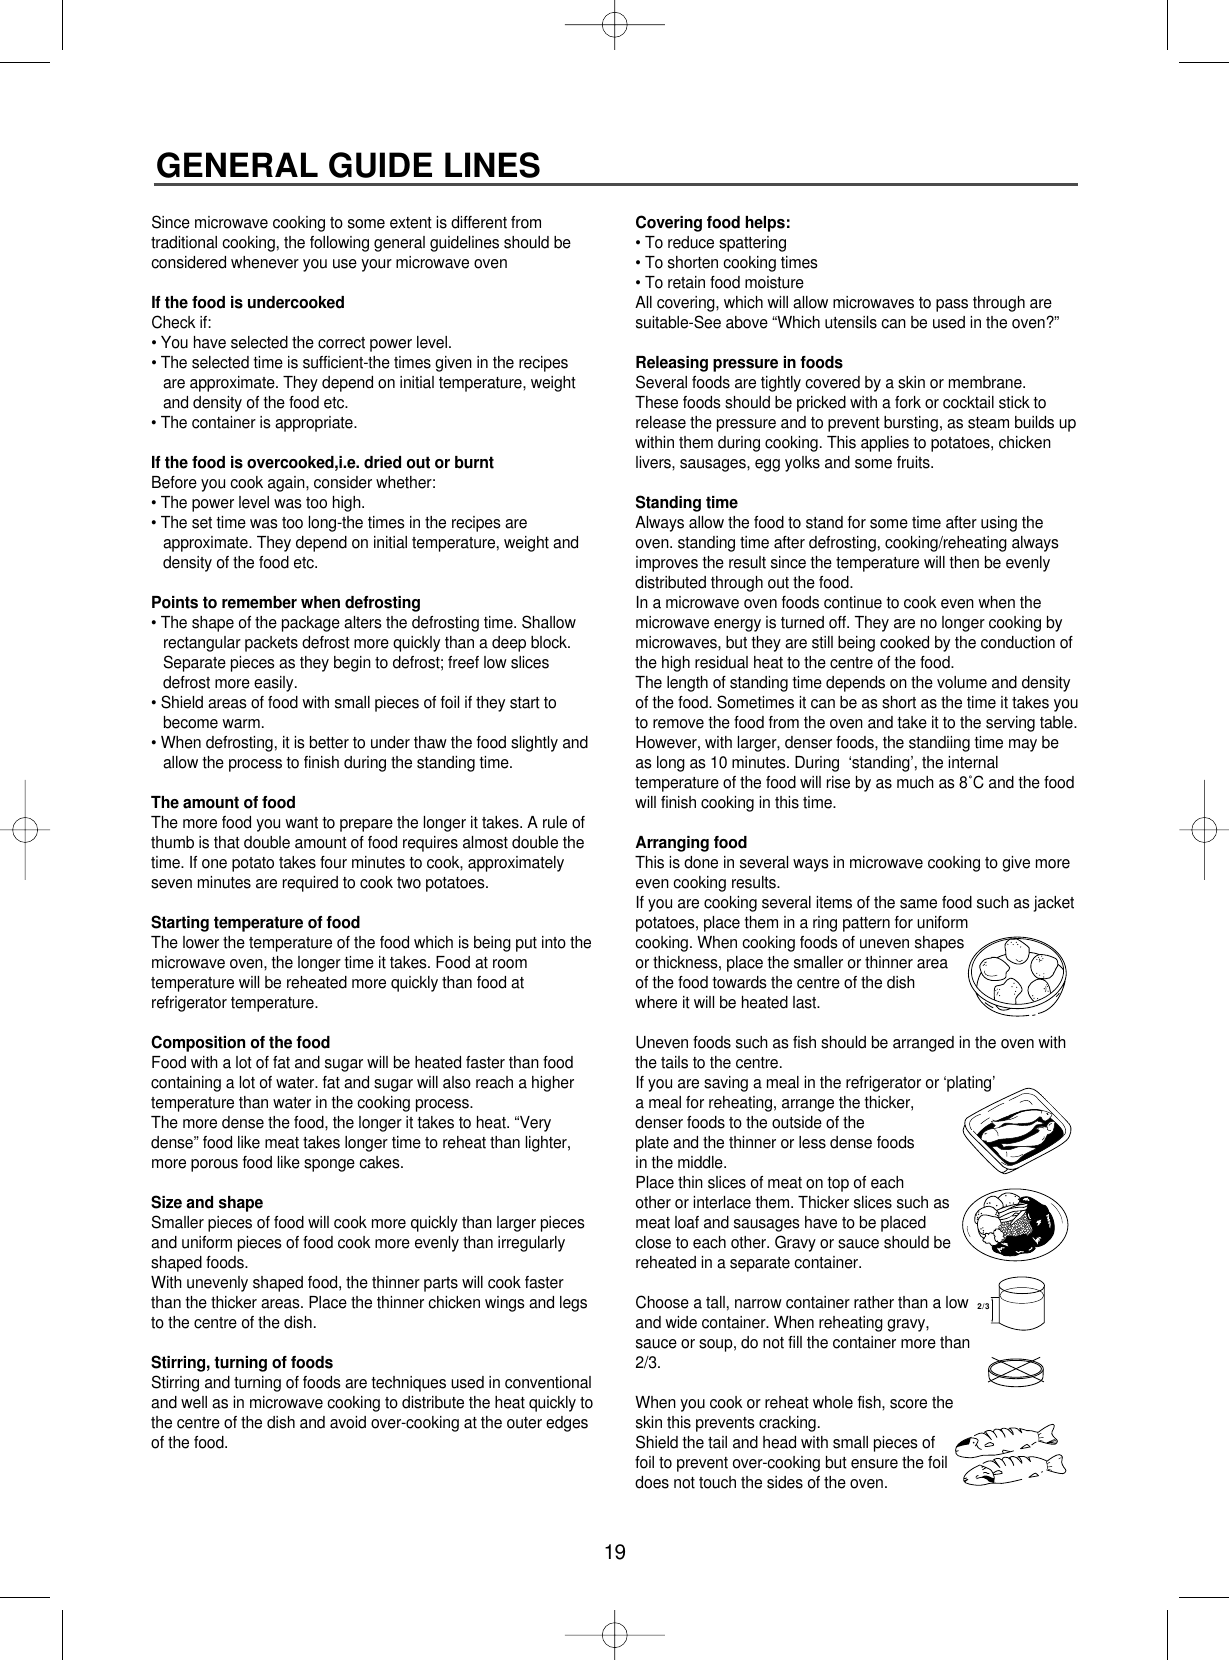 19GENERAL GUIDE LINESSince microwave cooking to some extent is different fromtraditional cooking, the following general guidelines should beconsidered whenever you use your microwave ovenIf the food is undercookedCheck if:• You have selected the correct power level.• The selected time is sufficient-the times given in the recipesare approximate. They depend on initial temperature, weightand density of the food etc.• The container is appropriate.If the food is overcooked,i.e. dried out or burntBefore you cook again, consider whether:• The power level was too high.• The set time was too long-the times in the recipes areapproximate. They depend on initial temperature, weight anddensity of the food etc.Points to remember when defrosting• The shape of the package alters the defrosting time. Shallowrectangular packets defrost more quickly than a deep block.Separate pieces as they begin to defrost; freef low slicesdefrost more easily.• Shield areas of food with small pieces of foil if they start tobecome warm.• When defrosting, it is better to under thaw the food slightly andallow the process to finish during the standing time.The amount of foodThe more food you want to prepare the longer it takes. A rule ofthumb is that double amount of food requires almost double thetime. If one potato takes four minutes to cook, approximatelyseven minutes are required to cook two potatoes.Starting temperature of foodThe lower the temperature of the food which is being put into themicrowave oven, the longer time it takes. Food at roomtemperature will be reheated more quickly than food atrefrigerator temperature.Composition of the foodFood with a lot of fat and sugar will be heated faster than foodcontaining a lot of water. fat and sugar will also reach a highertemperature than water in the cooking process.The more dense the food, the longer it takes to heat. “Verydense” food like meat takes longer time to reheat than lighter,more porous food like sponge cakes.Size and shapeSmaller pieces of food will cook more quickly than larger piecesand uniform pieces of food cook more evenly than irregularlyshaped foods.With unevenly shaped food, the thinner parts will cook fasterthan the thicker areas. Place the thinner chicken wings and legsto the centre of the dish.Stirring, turning of foodsStirring and turning of foods are techniques used in conventionaland well as in microwave cooking to distribute the heat quickly tothe centre of the dish and avoid over-cooking at the outer edgesof the food.Covering food helps:• To reduce spattering• To shorten cooking times• To retain food moistureAll covering, which will allow microwaves to pass through aresuitable-See above “Which utensils can be used in the oven?”Releasing pressure in foodsSeveral foods are tightly covered by a skin or membrane.These foods should be pricked with a fork or cocktail stick torelease the pressure and to prevent bursting, as steam builds upwithin them during cooking. This applies to potatoes, chickenlivers, sausages, egg yolks and some fruits.Standing timeAlways allow the food to stand for some time after using theoven. standing time after defrosting, cooking/reheating alwaysimproves the result since the temperature will then be evenlydistributed through out the food.In a microwave oven foods continue to cook even when themicrowave energy is turned off. They are no longer cooking bymicrowaves, but they are still being cooked by the conduction ofthe high residual heat to the centre of the food. The length of standing time depends on the volume and densityof the food. Sometimes it can be as short as the time it takes youto remove the food from the oven and take it to the serving table.However, with larger, denser foods, the standiing time may beas long as 10 minutes. During  ‘standing’, the internaltemperature of the food will rise by as much as 8˚C and the foodwill finish cooking in this time.Arranging foodThis is done in several ways in microwave cooking to give moreeven cooking results.If you are cooking several items of the same food such as jacketpotatoes, place them in a ring pattern for uniformcooking. When cooking foods of uneven shapesor thickness, place the smaller or thinner areaof the food towards the centre of the dishwhere it will be heated last.Uneven foods such as fish should be arranged in the oven withthe tails to the centre.If you are saving a meal in the refrigerator or ‘plating’a meal for reheating, arrange the thicker,denser foods to the outside of the plate and the thinner or less dense foods in the middle. Place thin slices of meat on top of each other or interlace them. Thicker slices such asmeat loaf and sausages have to be placedclose to each other. Gravy or sauce should bereheated in a separate container.Choose a tall, narrow container rather than a lowand wide container. When reheating gravy,sauce or soup, do not fill the container more than2/3.When you cook or reheat whole fish, score theskin this prevents cracking.Shield the tail and head with small pieces offoil to prevent over-cooking but ensure the foildoes not touch the sides of the oven.2/3